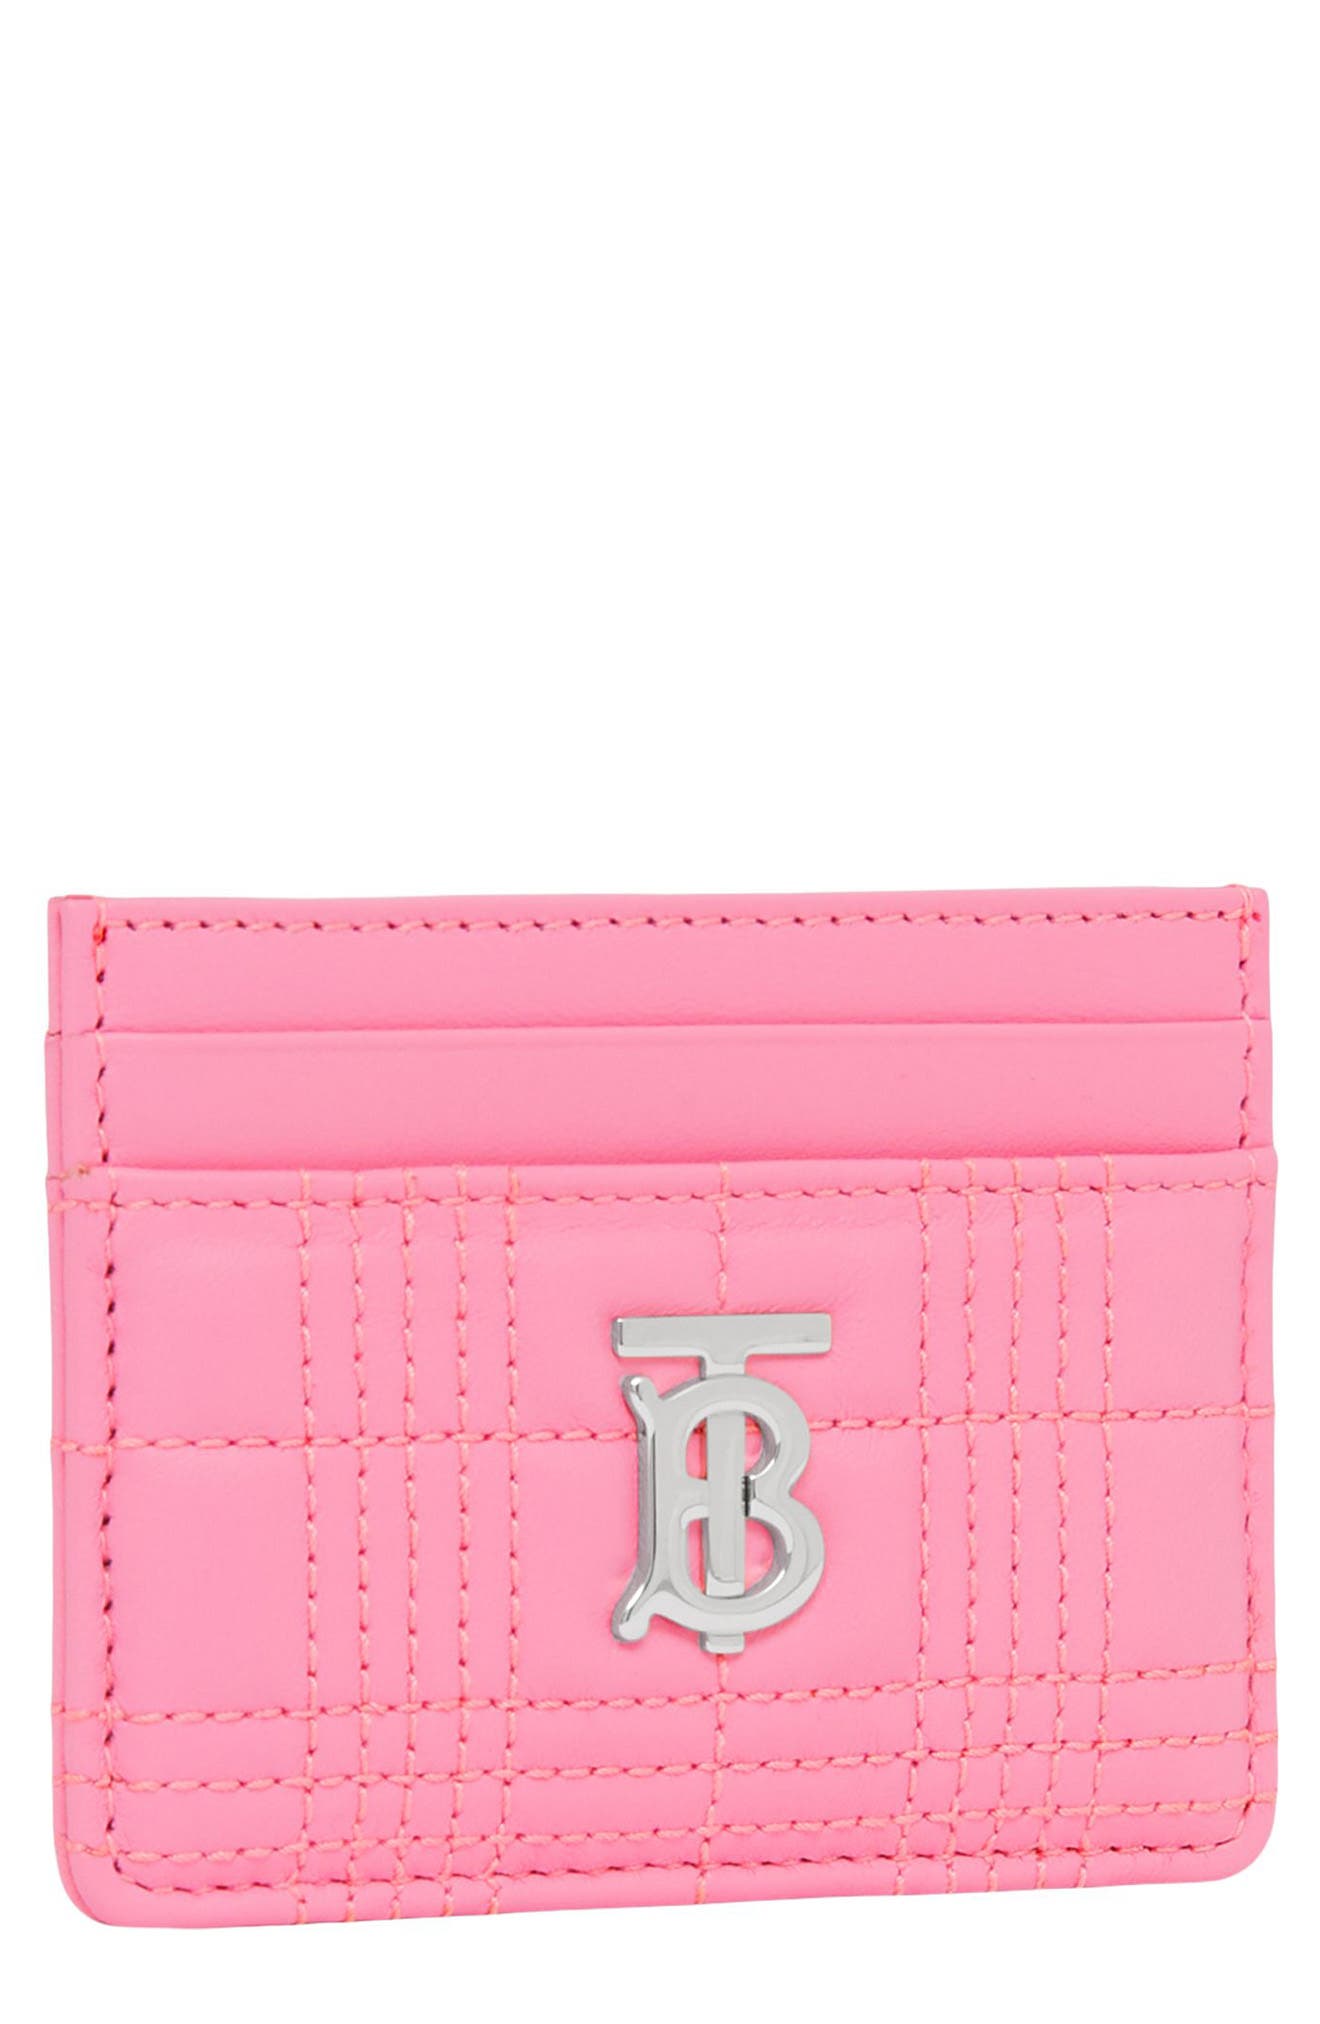 Burberry Lola Quilted Leather Card Case in Primrose Pink at Nordstrom